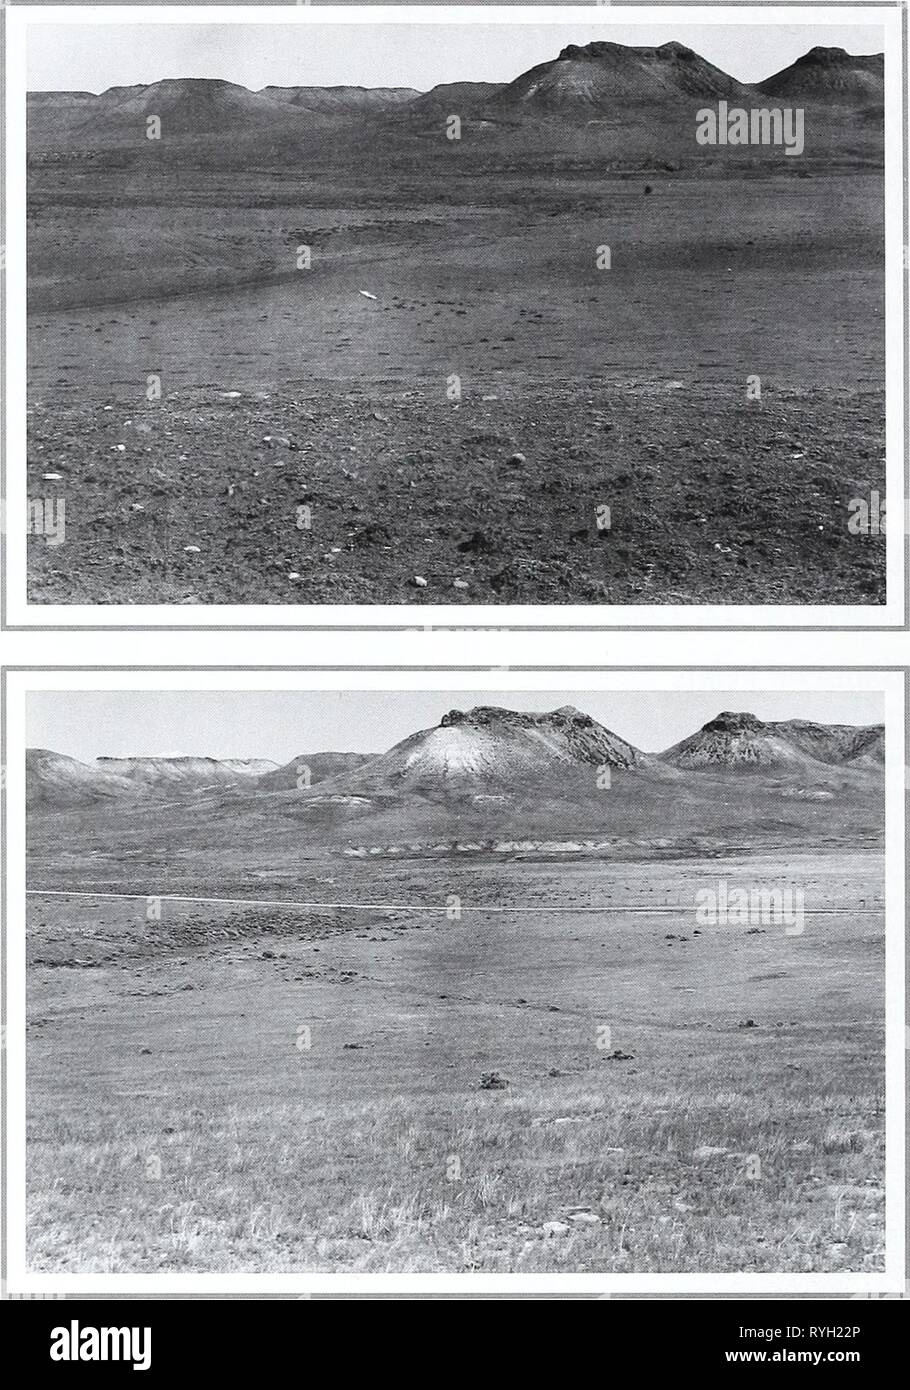 Eighty years of vegetation and landscape changes in the Northern Great Plains : a photographic record  eightyyearsofveg45klem Year: 2001  Original Photograph September 27, 1917. ShantzS-10-1917. Facing southeast. First Retake and Description July 5, 1959. W.S.P., 1-10-1959. The original picture shows a very much overgrazed range. The grasses consisting of depauperate Bouteloua plants, Carexfilifolia, and some Phlox spp. The retake shows an im- proved range with a fair amount of Bouteloua gracilis. However, Carex Jilifolia is still abundant and there is some Stipa spp. still present (from Phill Stock Photo